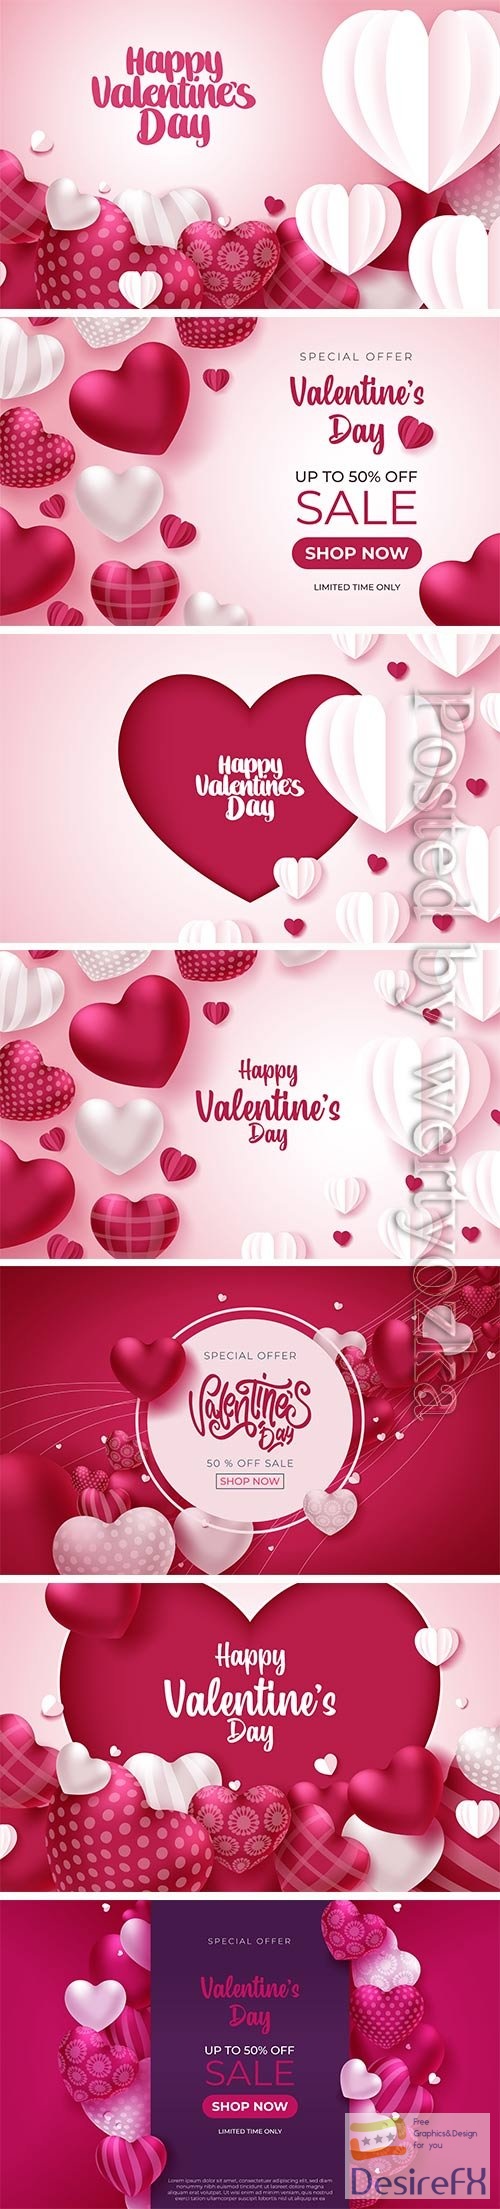 Valentine greeting card with hearts on pink